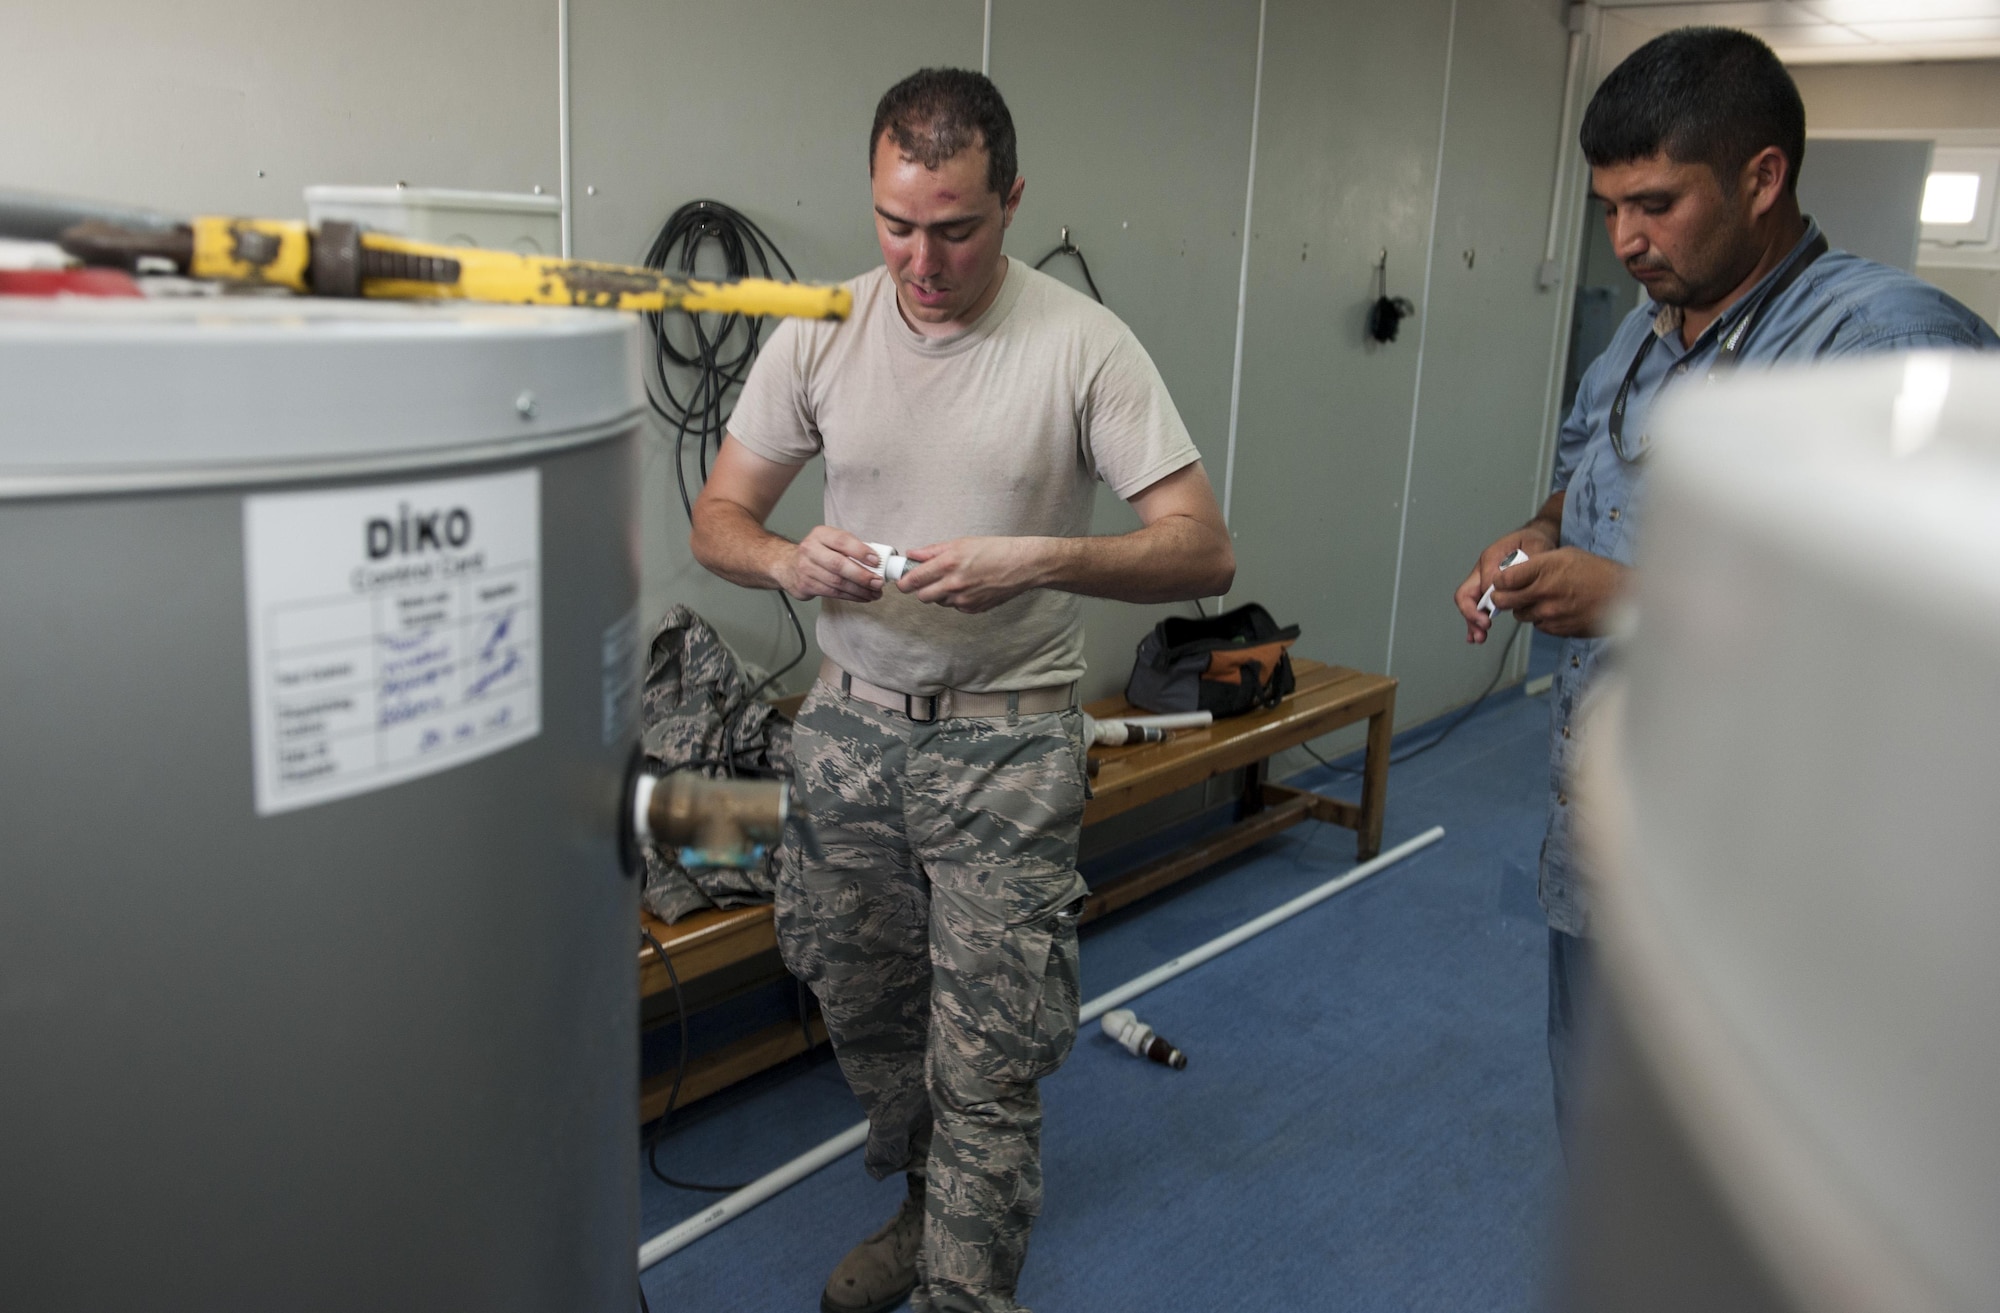 U.S. Air Force Staff Sgt. Ryan Bombardiere, 48th Civil Engineer Squadron (CES) water fuels system maintenance technician, and Ahmet Karsli 39th CES, fit pipeing together for use in repairs to a water heater July 28, 2016, at Incirlik Air Base, Turkey. Water heater units store and heat water for use throughout facilities for showers, sinks washers and other devices. CES servicemembers from across   U.S. Air Forces in Europe-Air Forces Africa integrated with members from the 39th CES to support the ongoing 39th Air Base Wing missions after the July 15, 2016, failed Turkish military coup. (U.S. Air Force photo by Staff Sgt. Jack Sanders)